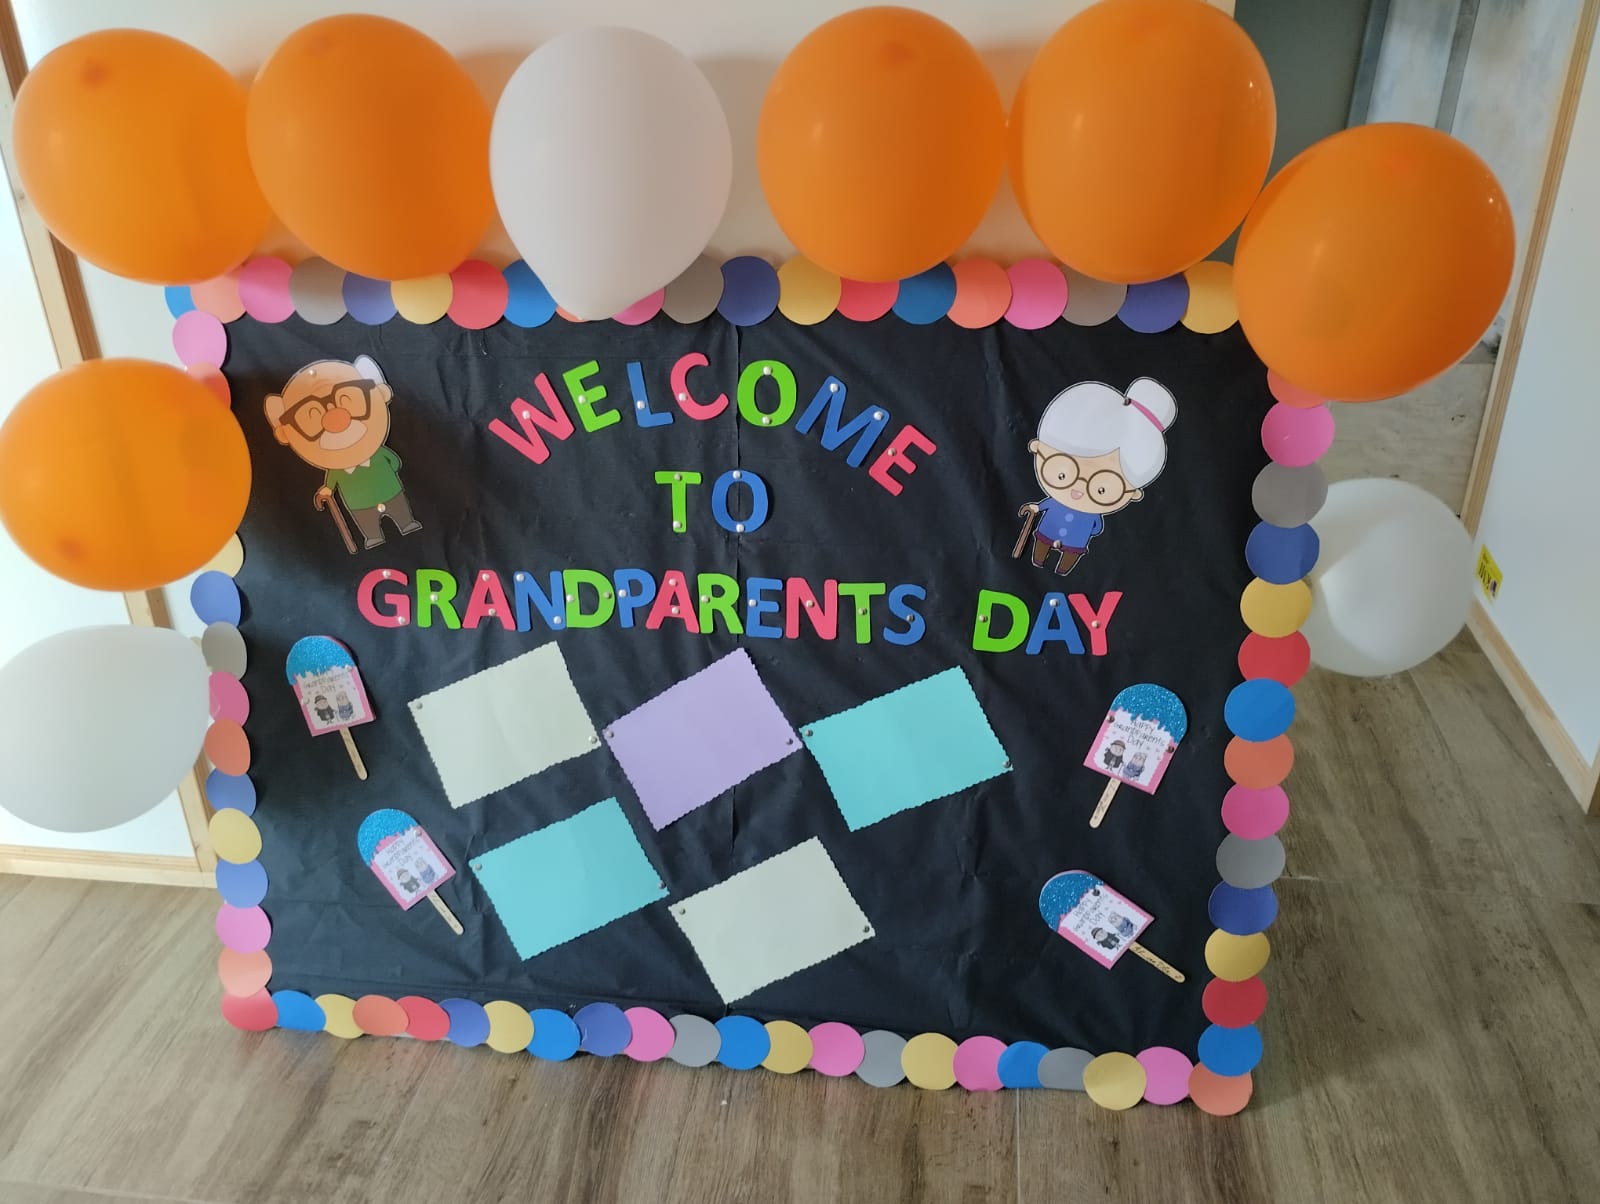 Forces School System B-17 Campus celebrated Grandparents Day